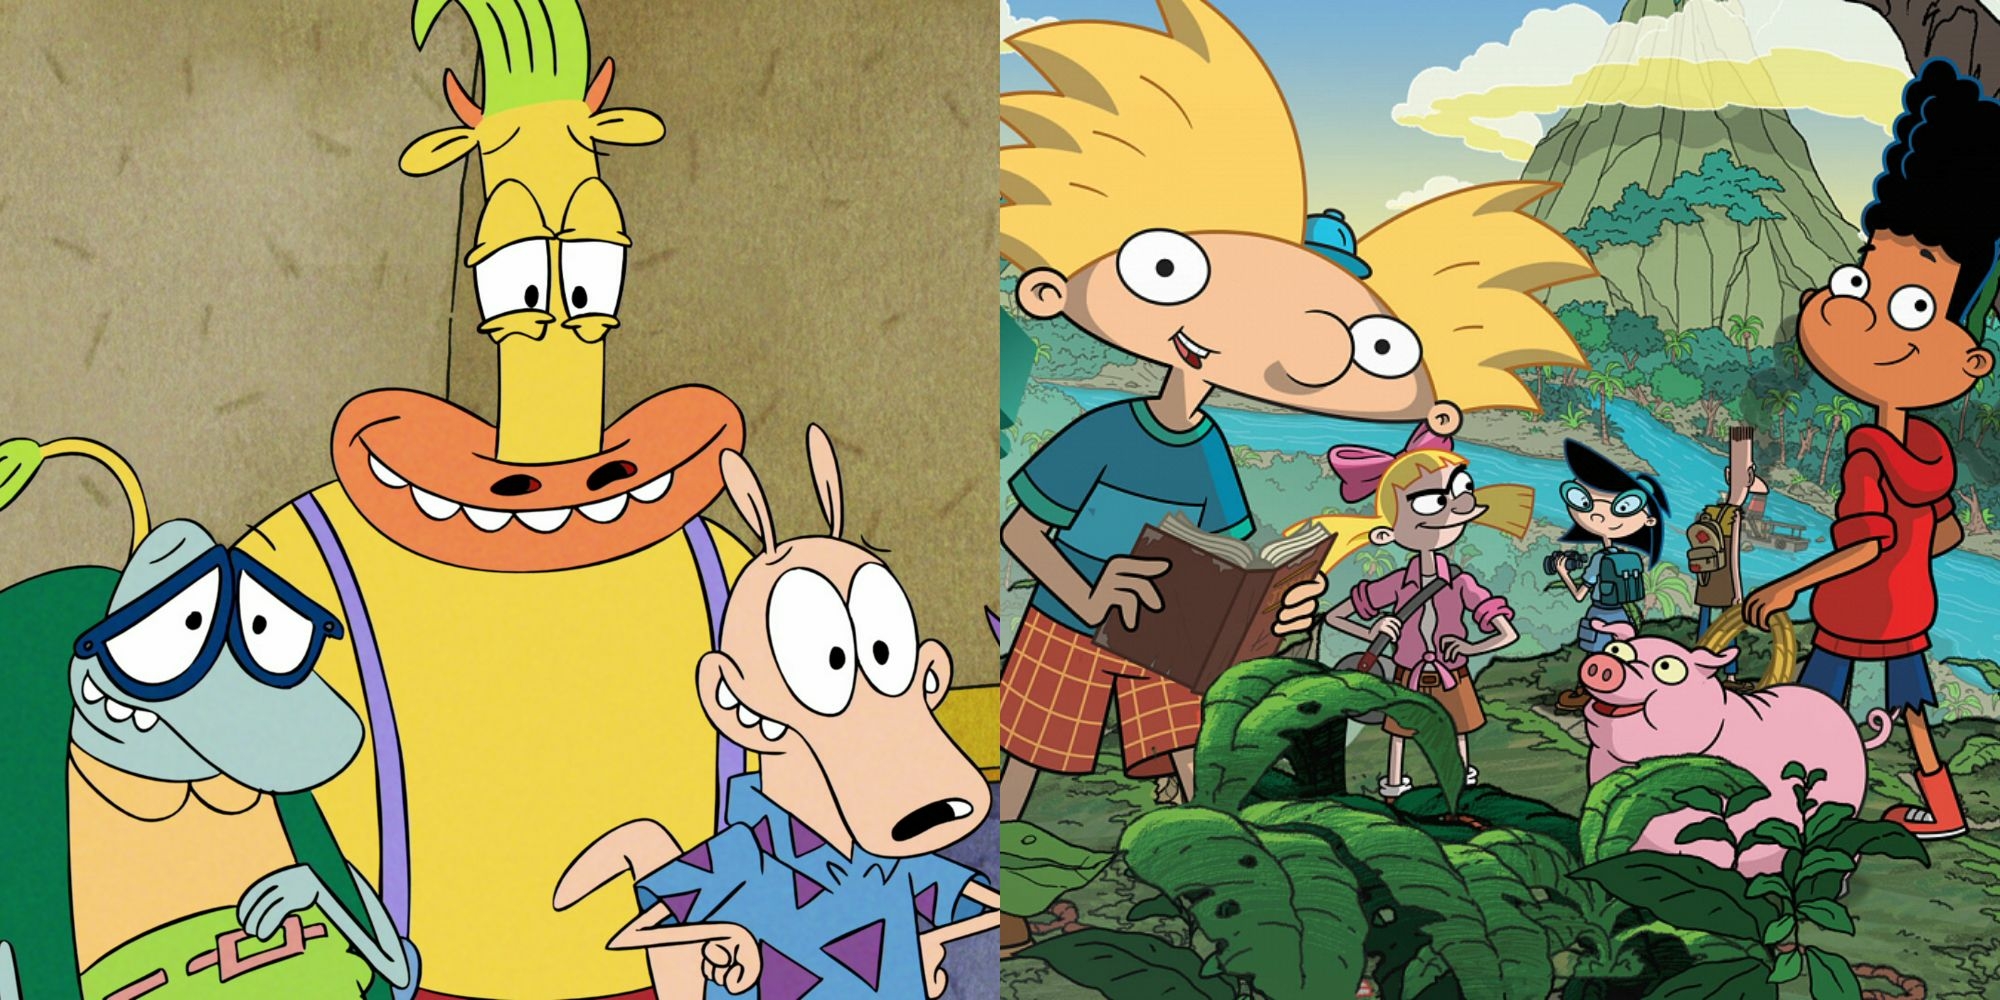 11 classic Nickelodeon TV shows and movies recently added to Netflix